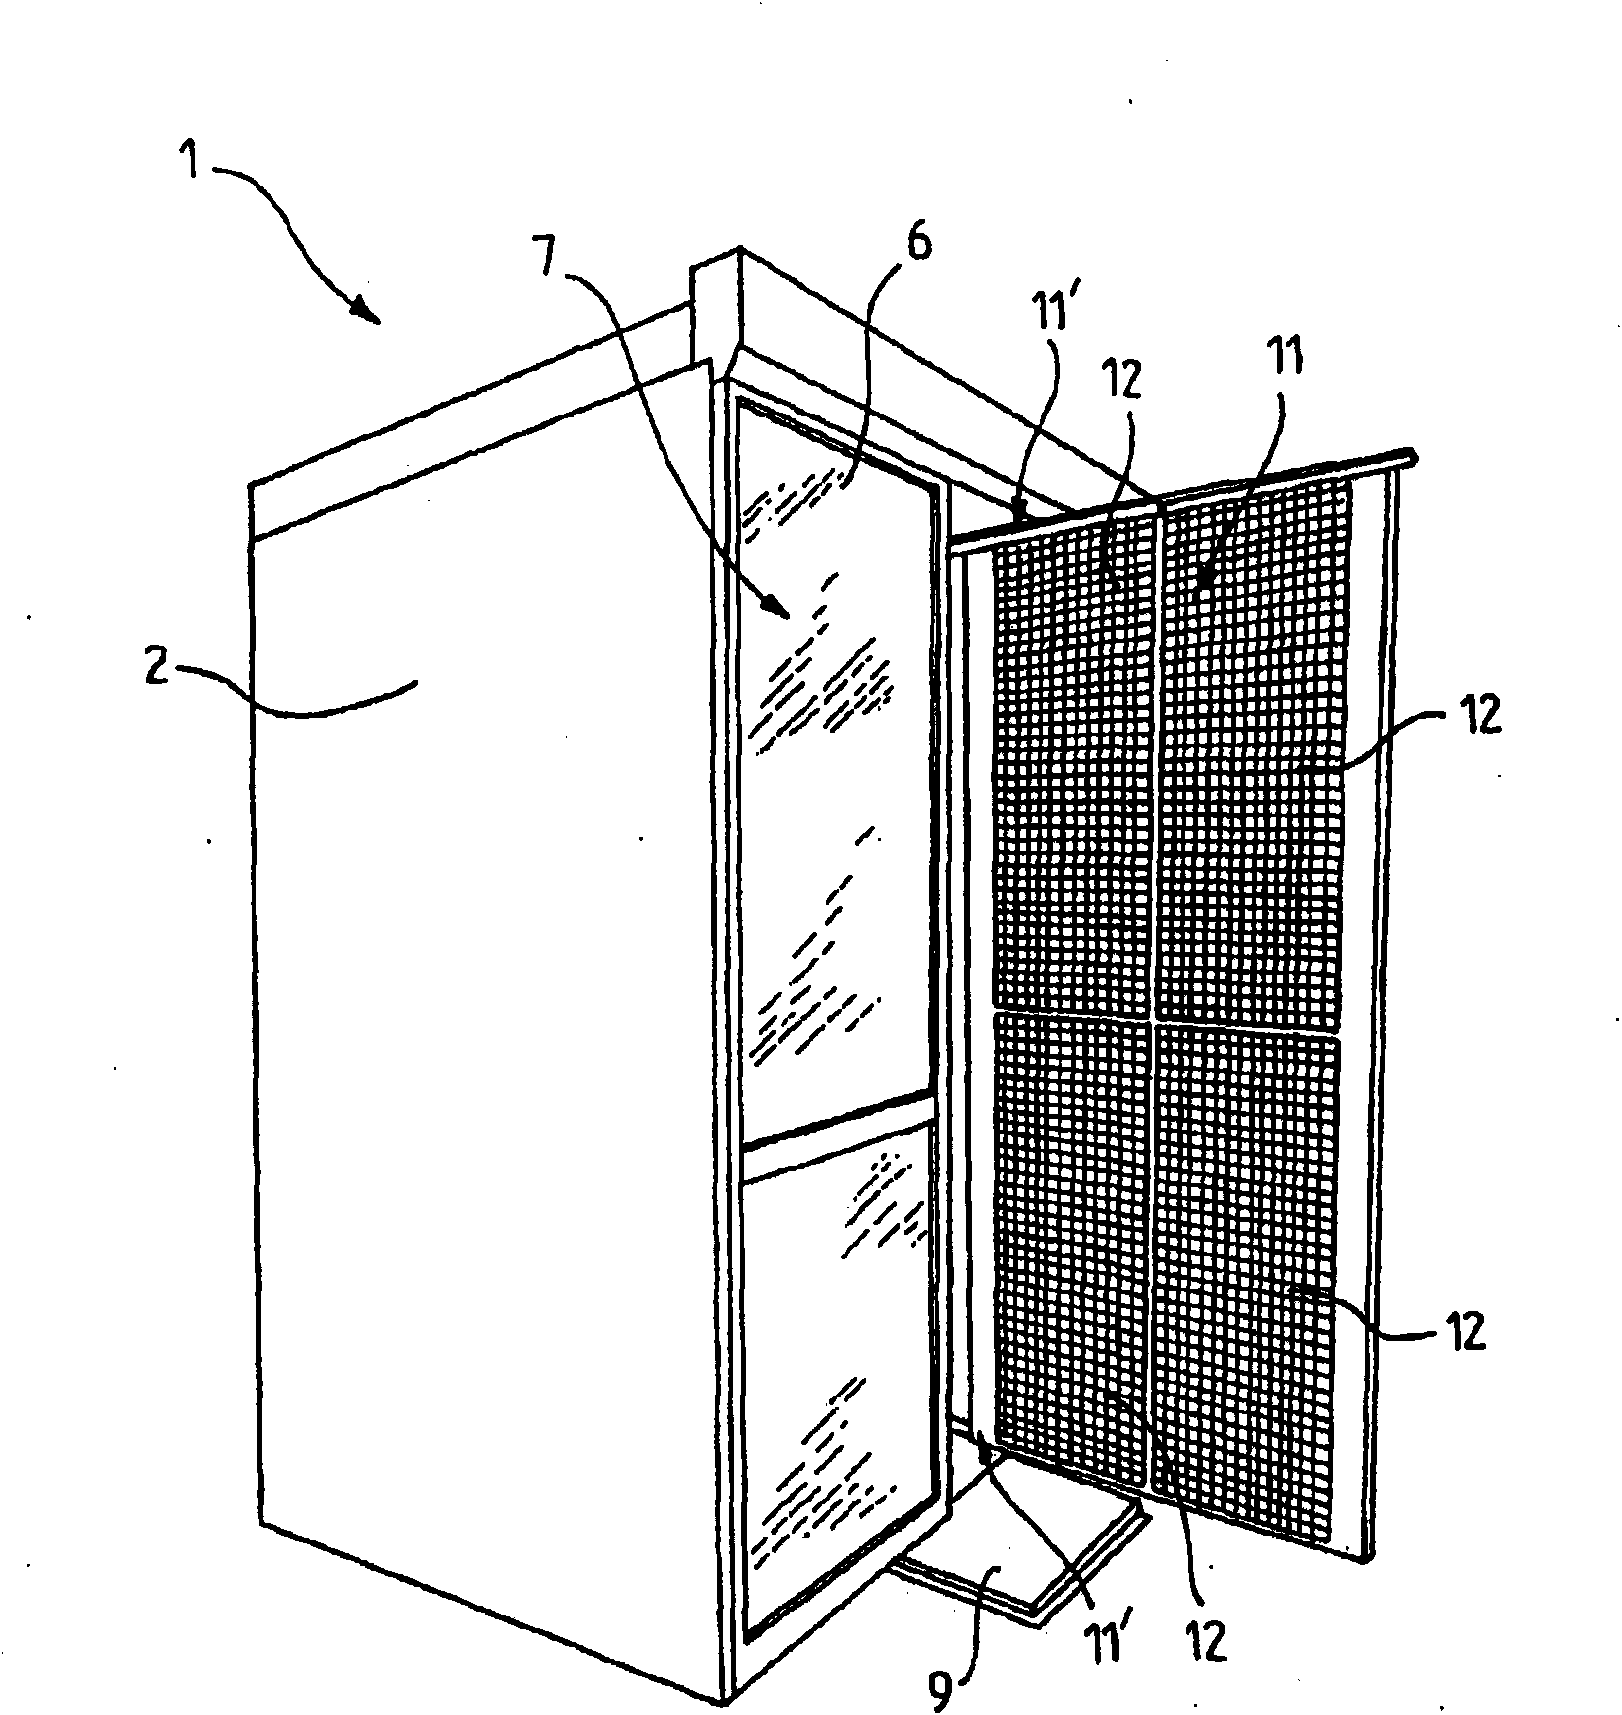 Device and method for monitoring the radioactive contamination of a user